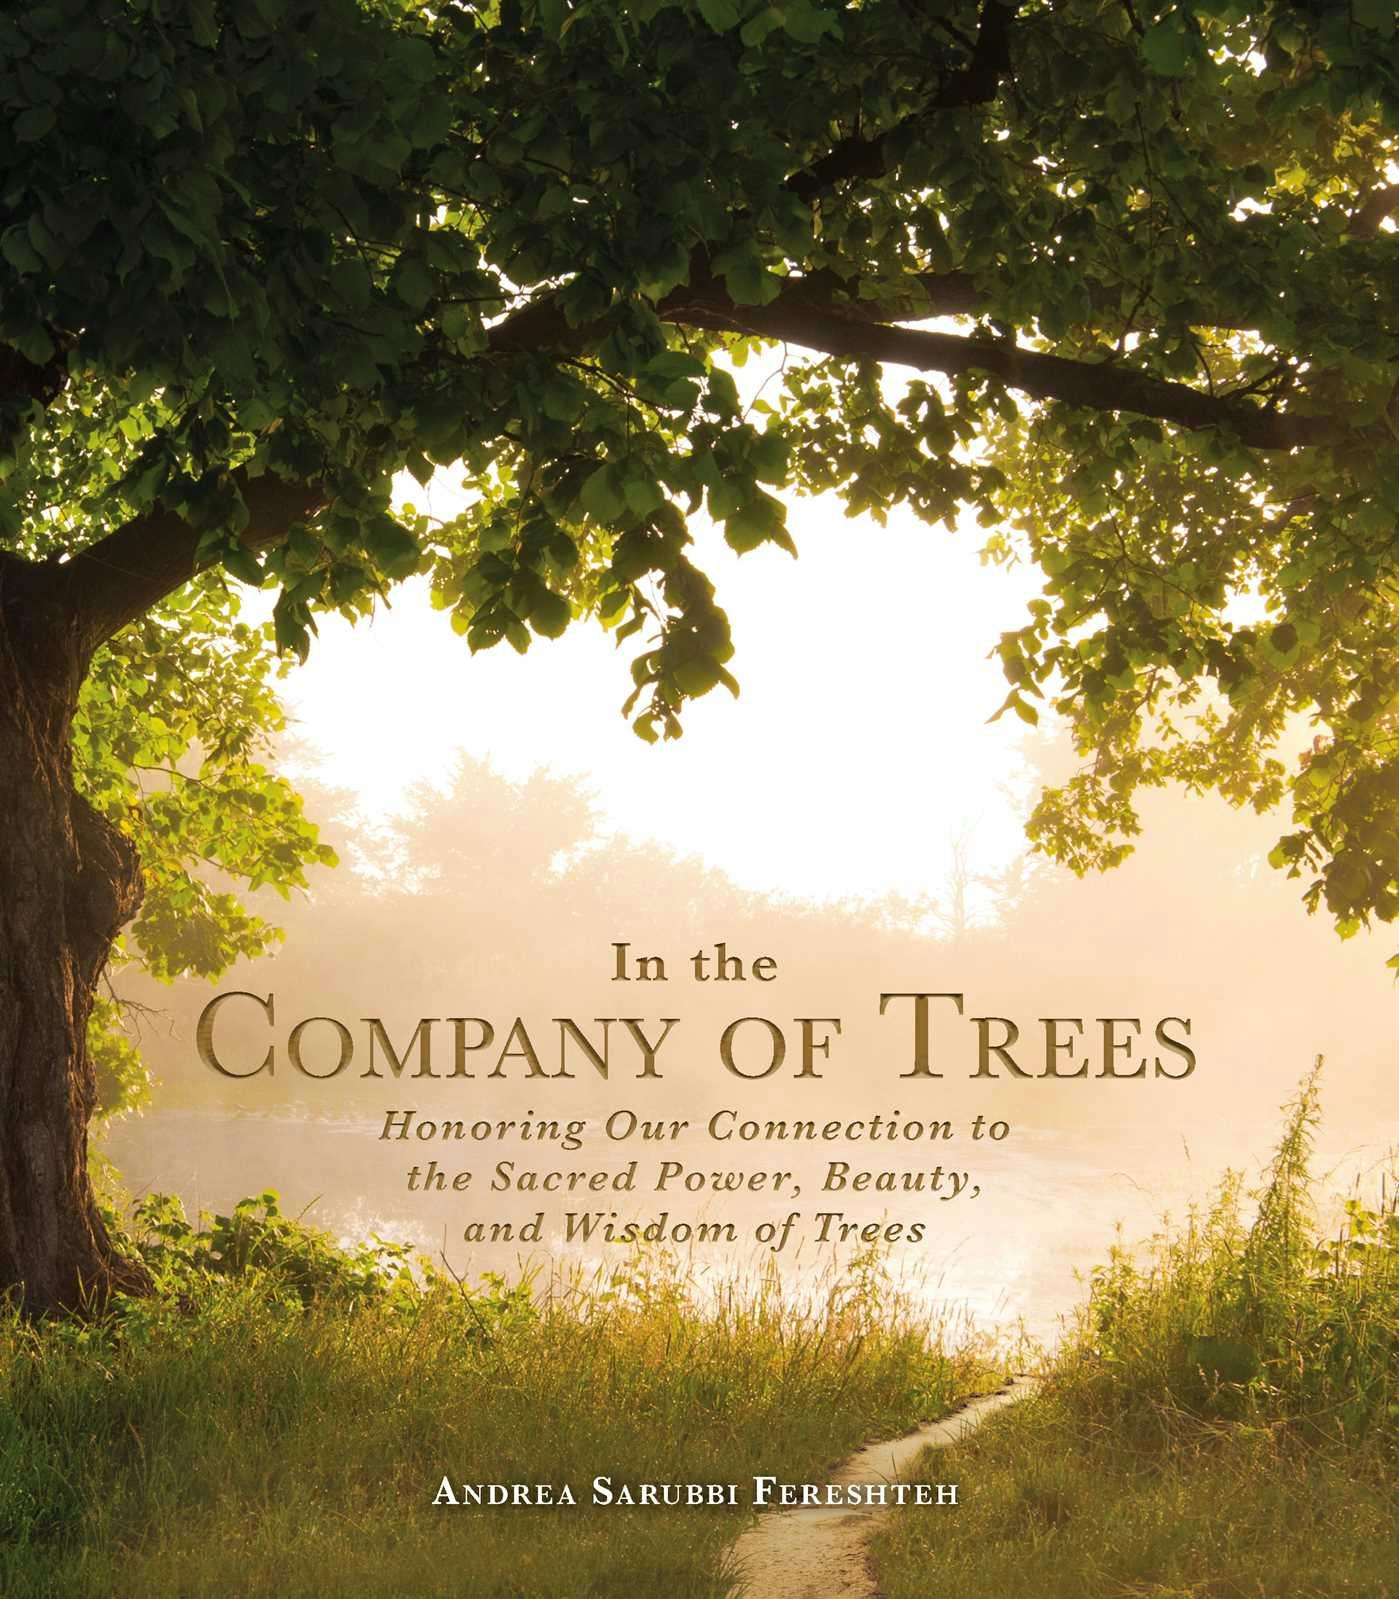 In the Company of Trees: Honoring Our Connection to the Sacred Power, Beauty, and Wisdom of Trees - Andrea Sarubbi Fereshteh